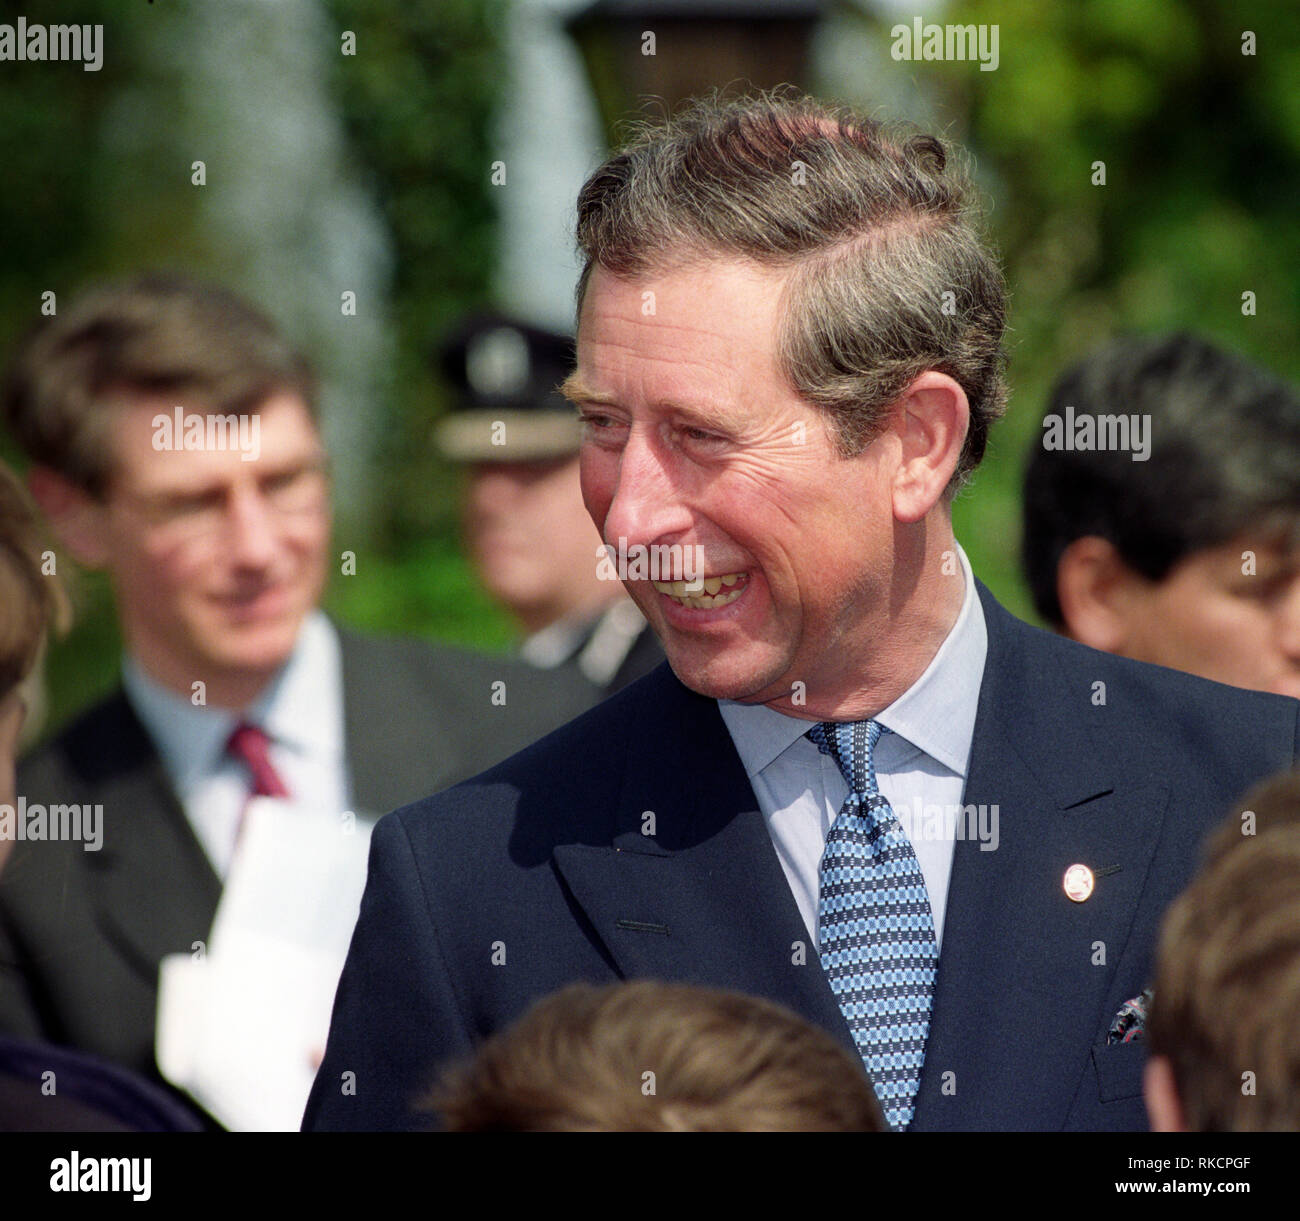 Royal visit to Sutton Scotney, Hampshire, England, UK by Royal Highness The Prince Charles Arthur George Prince of Wales and Earl of Chester, Duke of Cornwall, Duke of Rothesay on Wednesday 22nd April 1998 Stock Photo